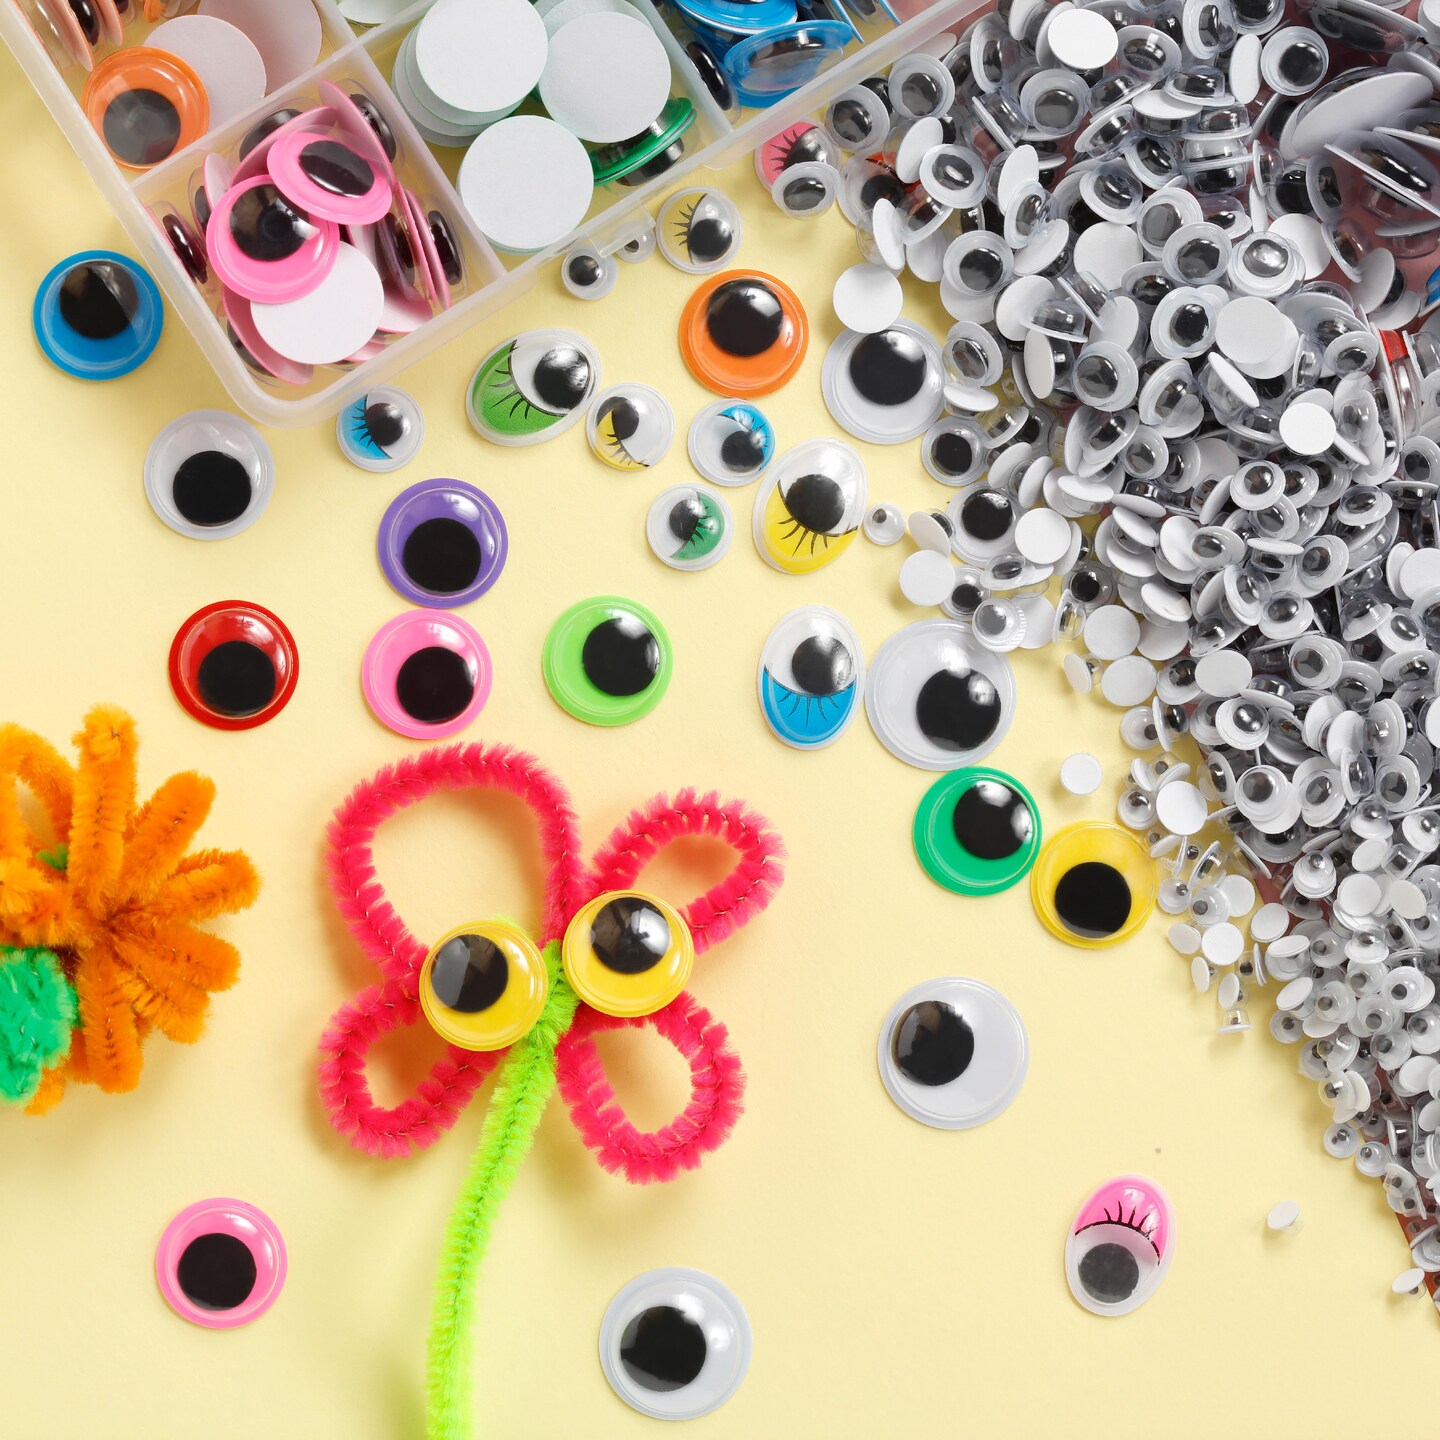 Incraftables Self Adhesive Googly Eyes 1680 pcs Set. Best Small